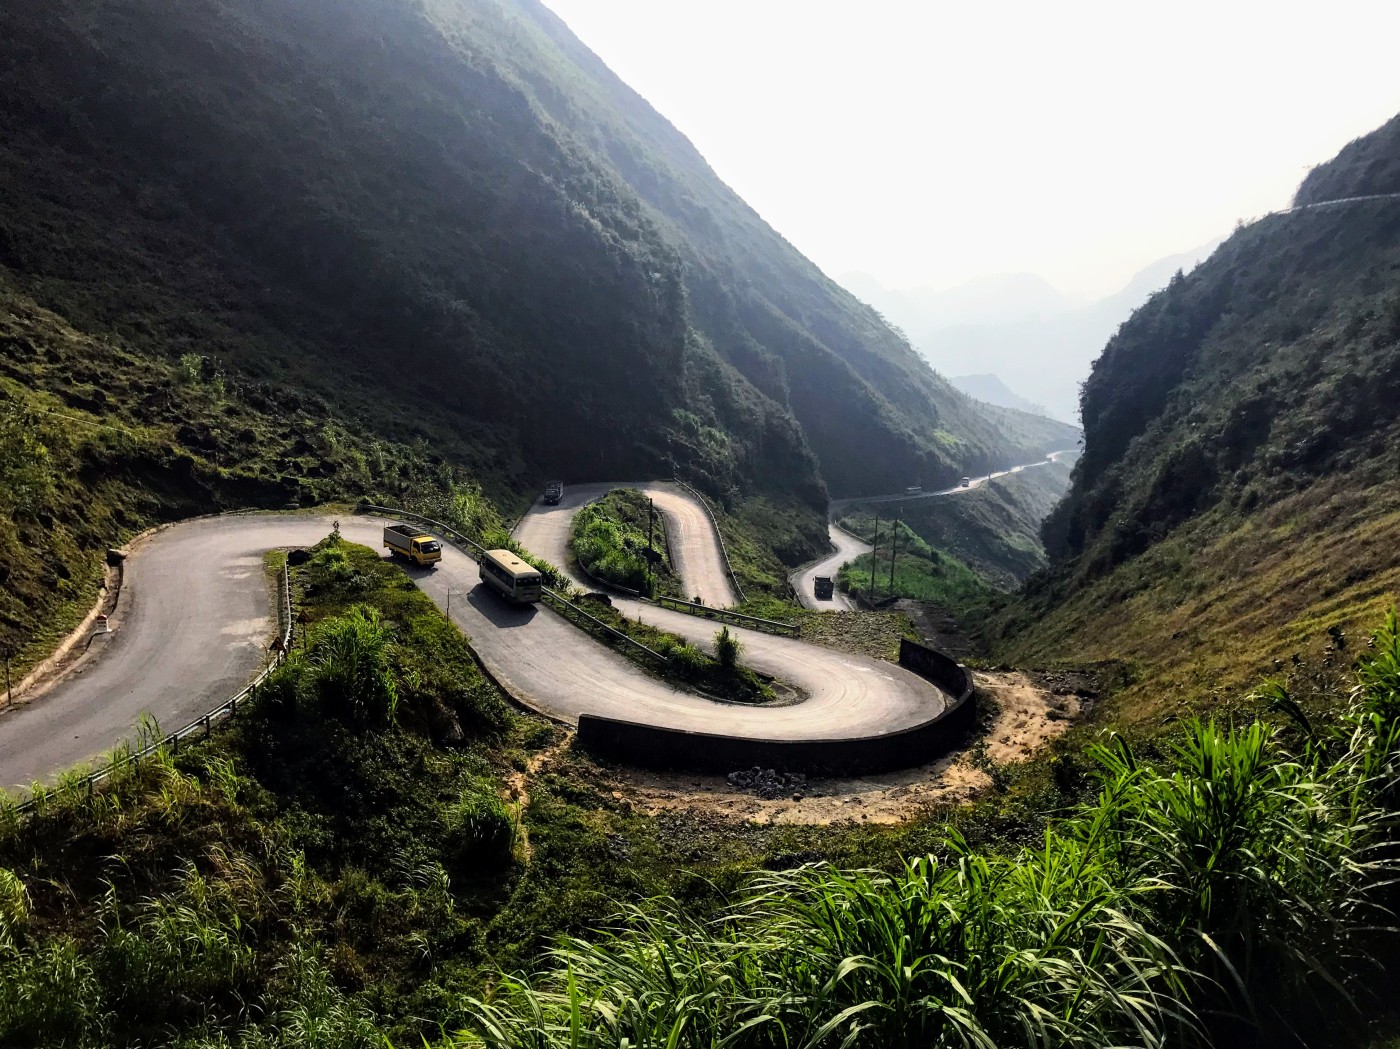 The Ha Giang Loop – Dear Family And Friends